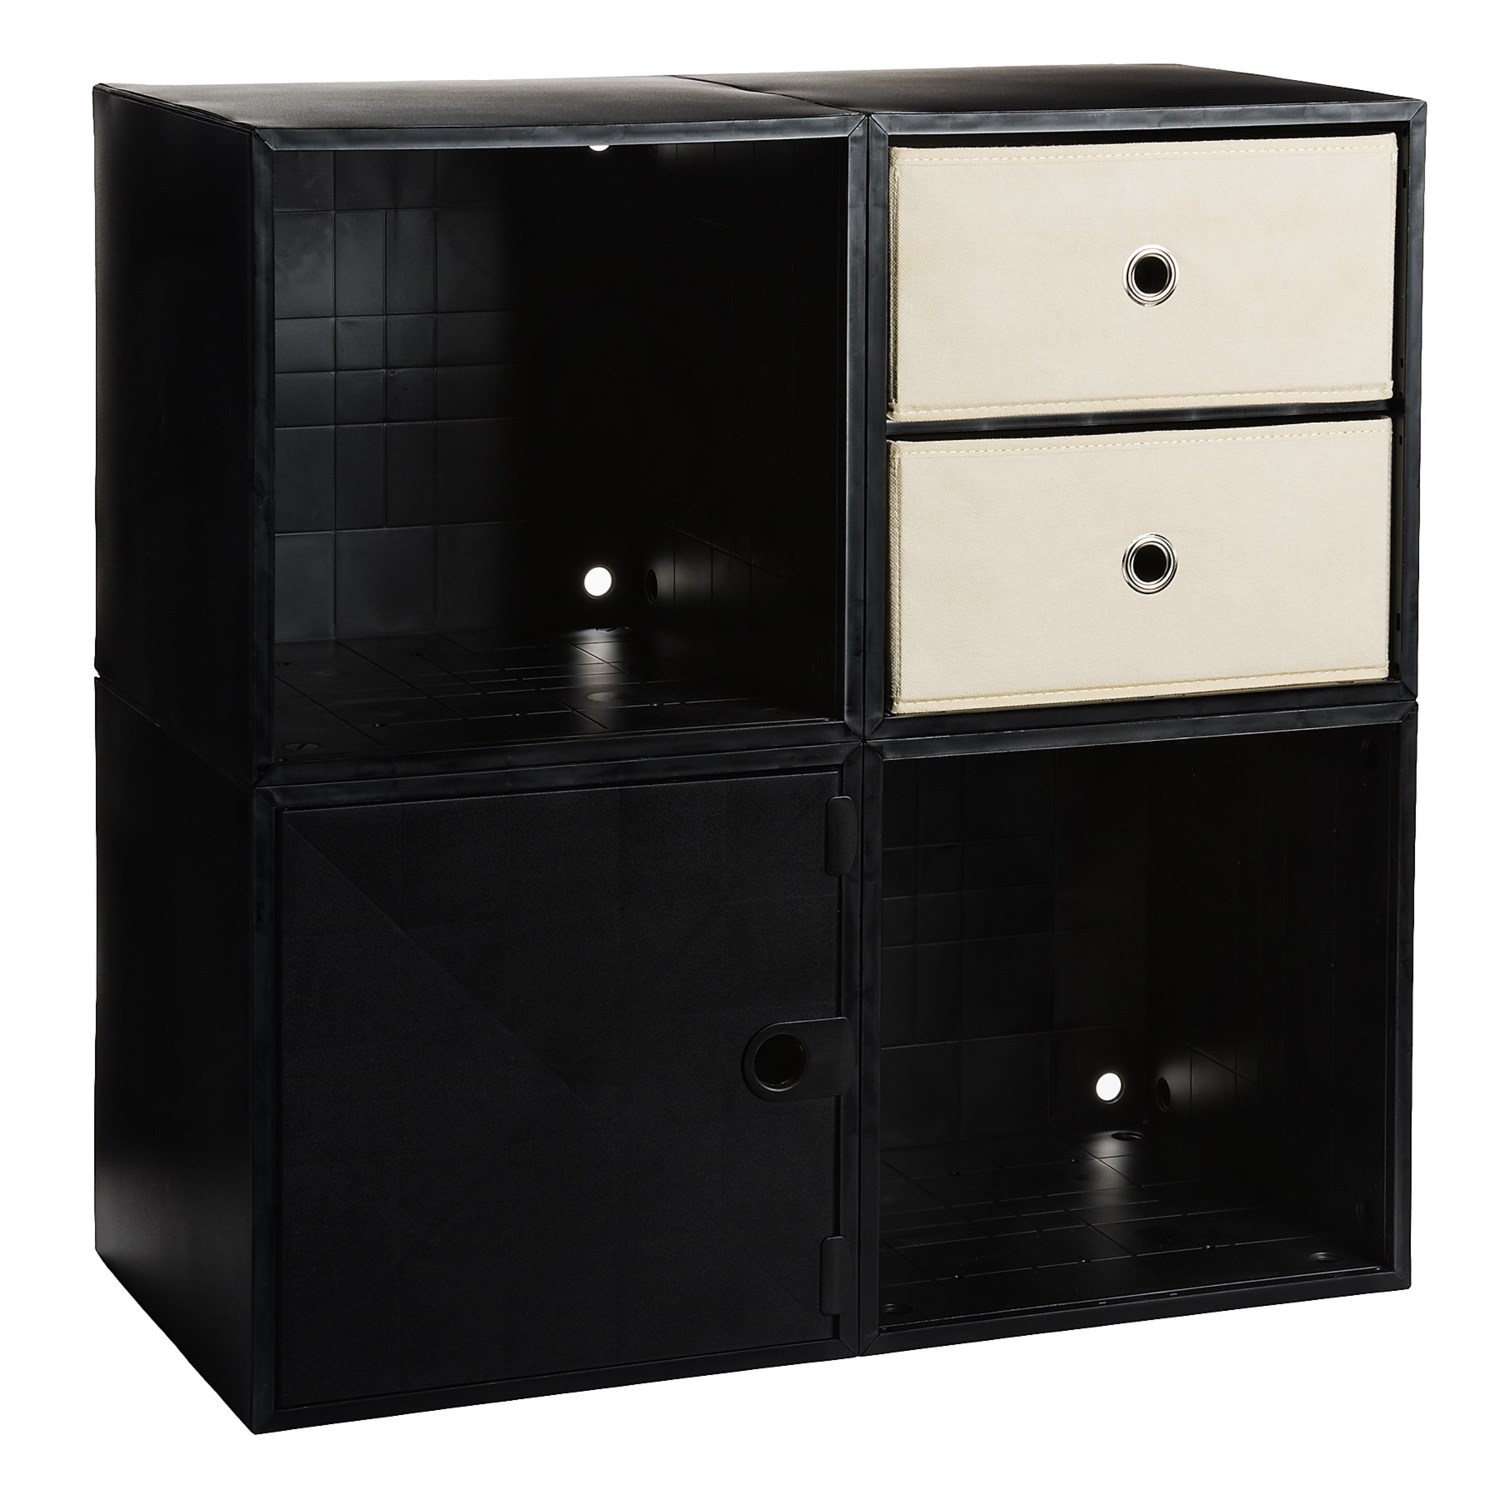 iCube Modular 4 Cube Storage Kit with Drawers in Black